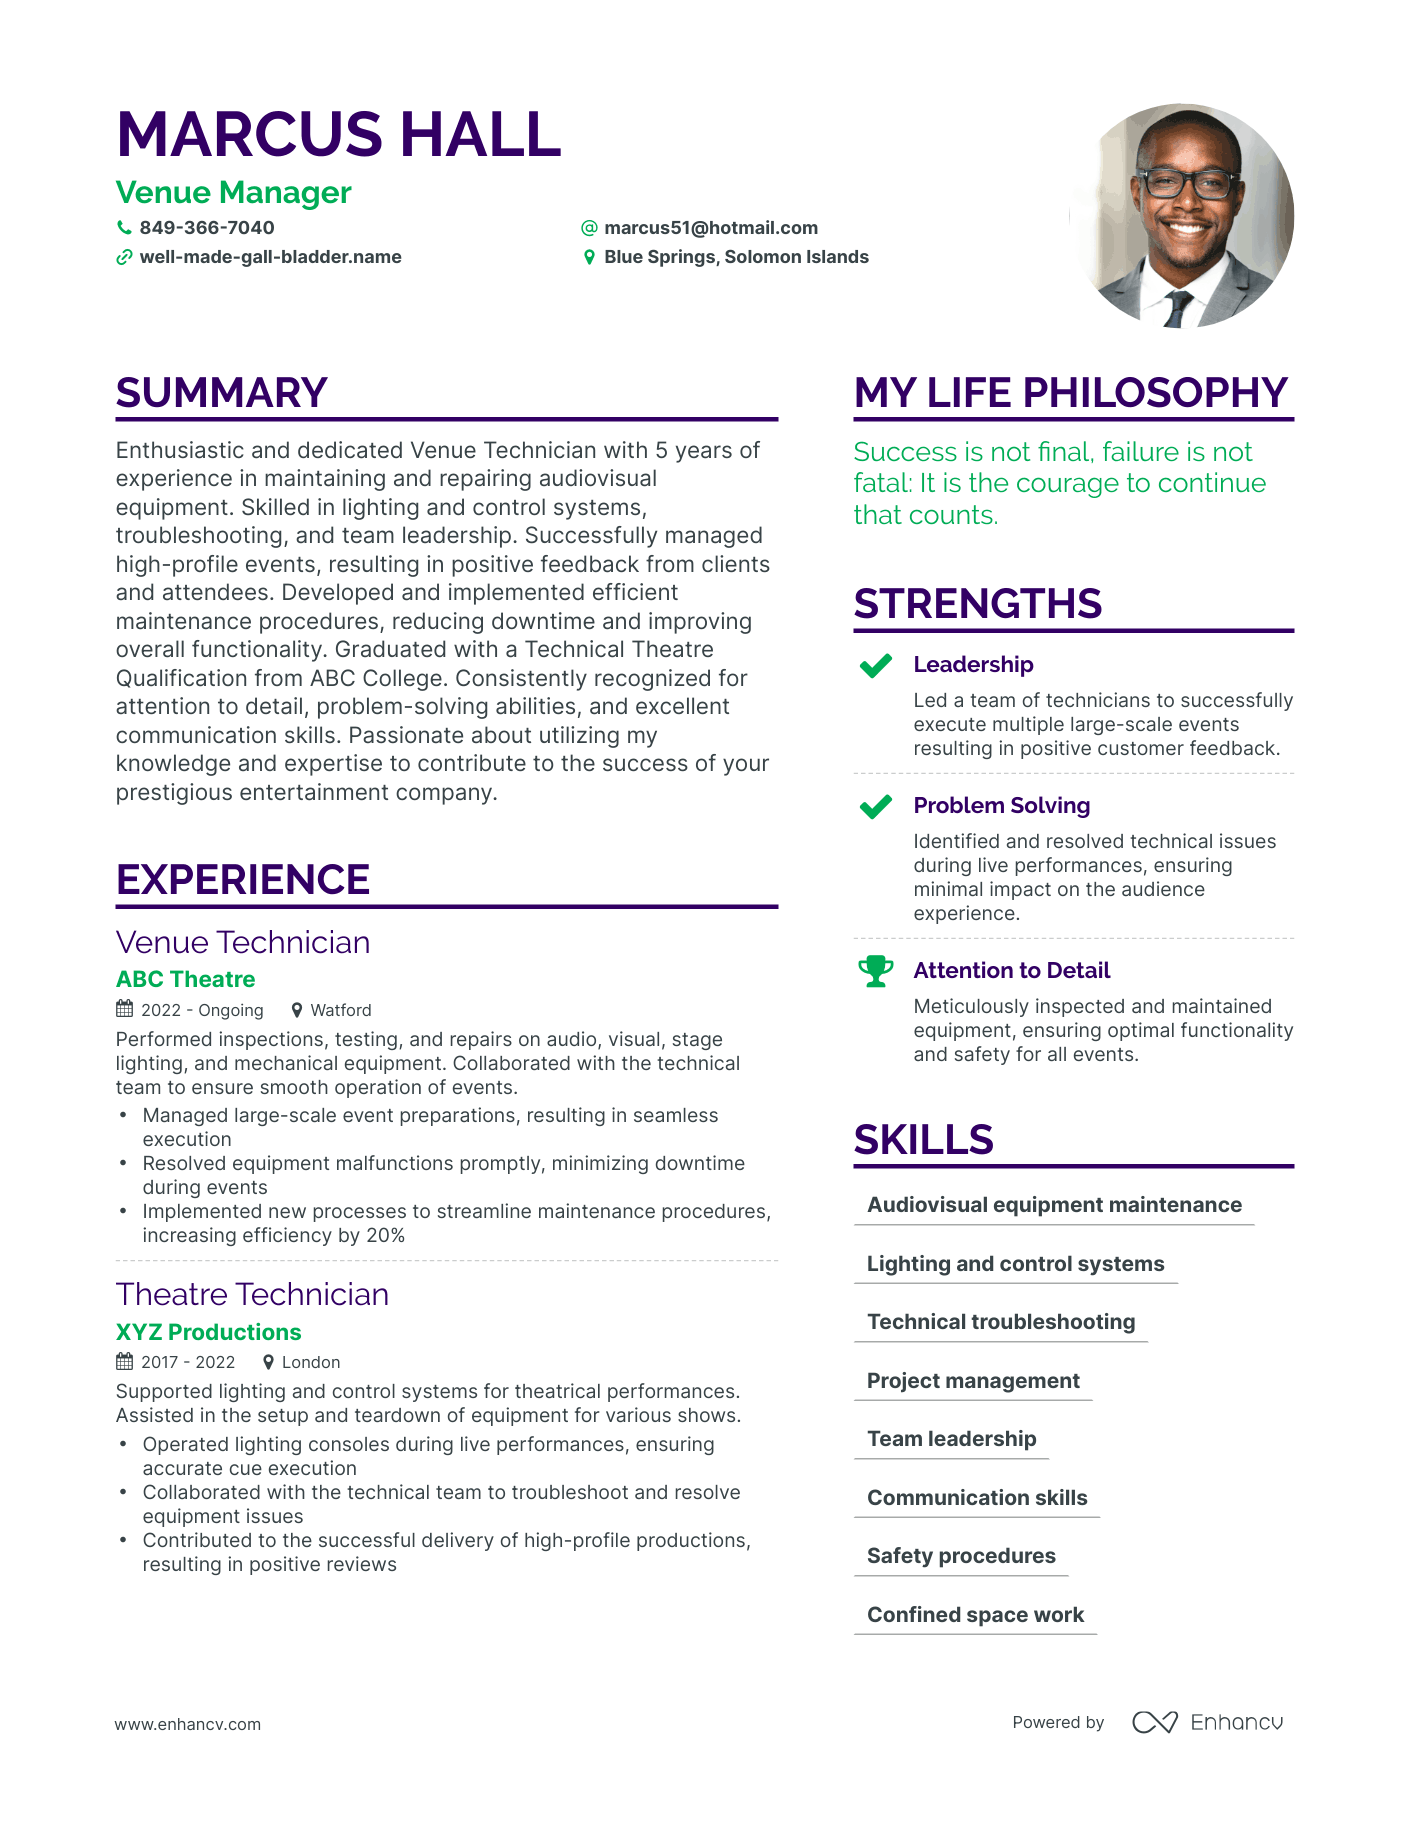 Modern Venue Manager Resume Example